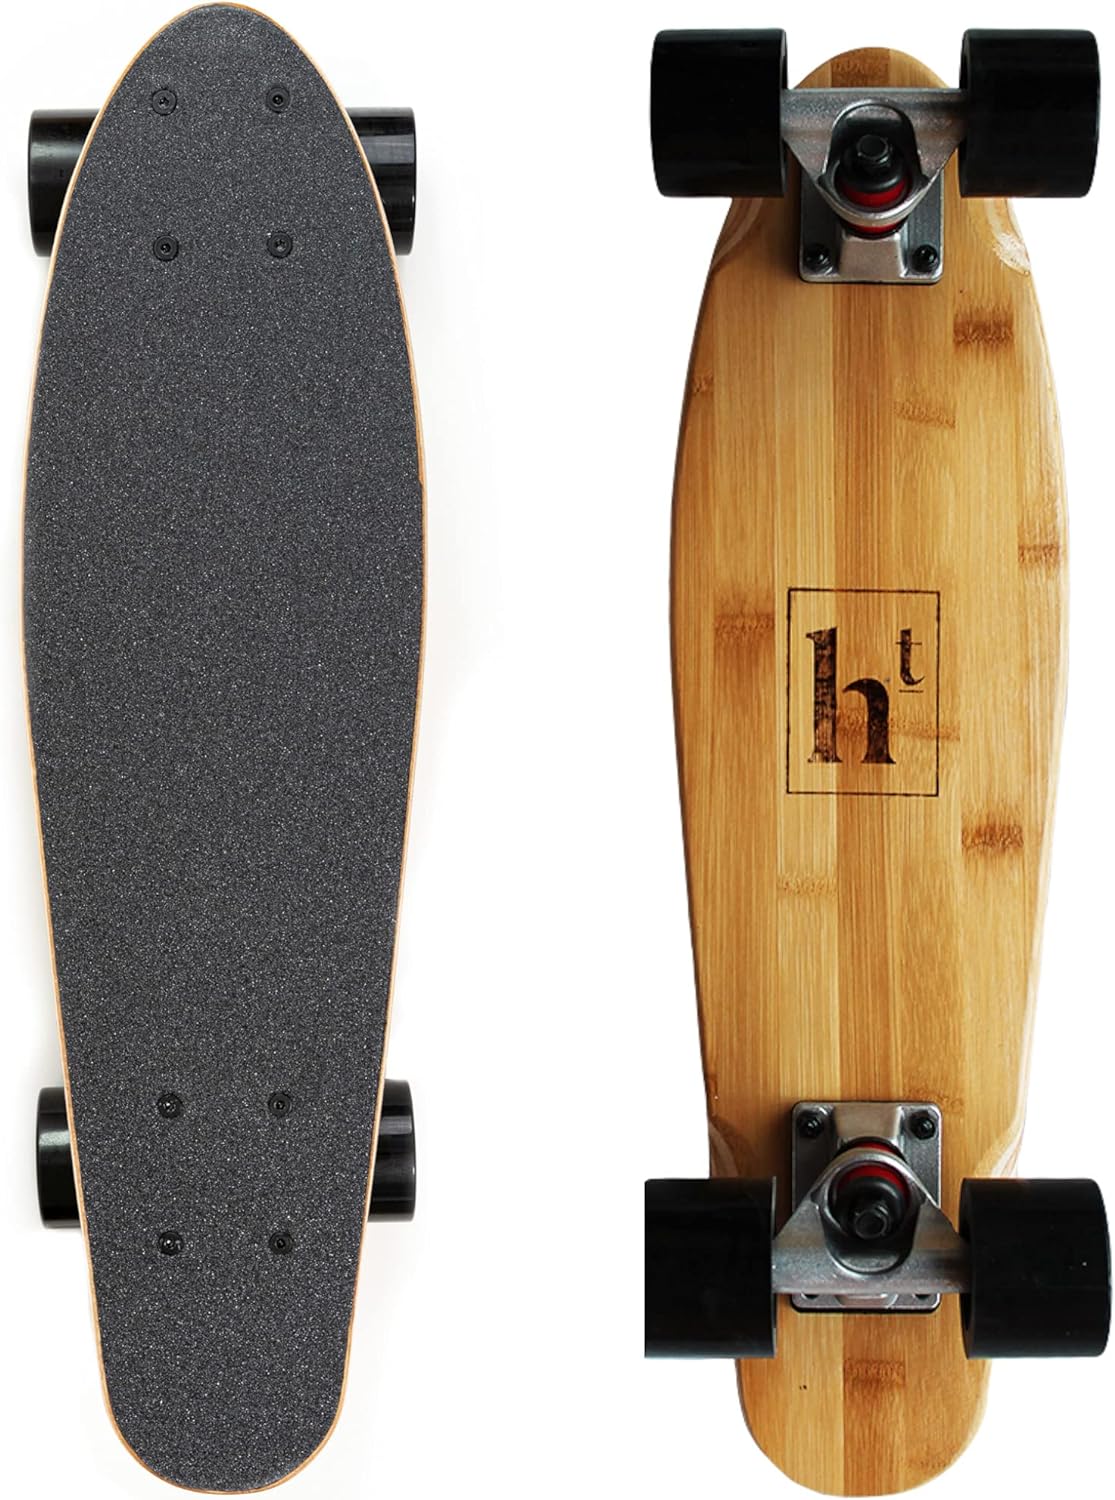 Haven T Essentials Complete 22 inch, 7 Ply Mini Cruiser Skateboard - Canadian Maple  Bamboo Deck, for Kids, Teens, and Adults, Anti-Skid, Waterproof, Lightweight